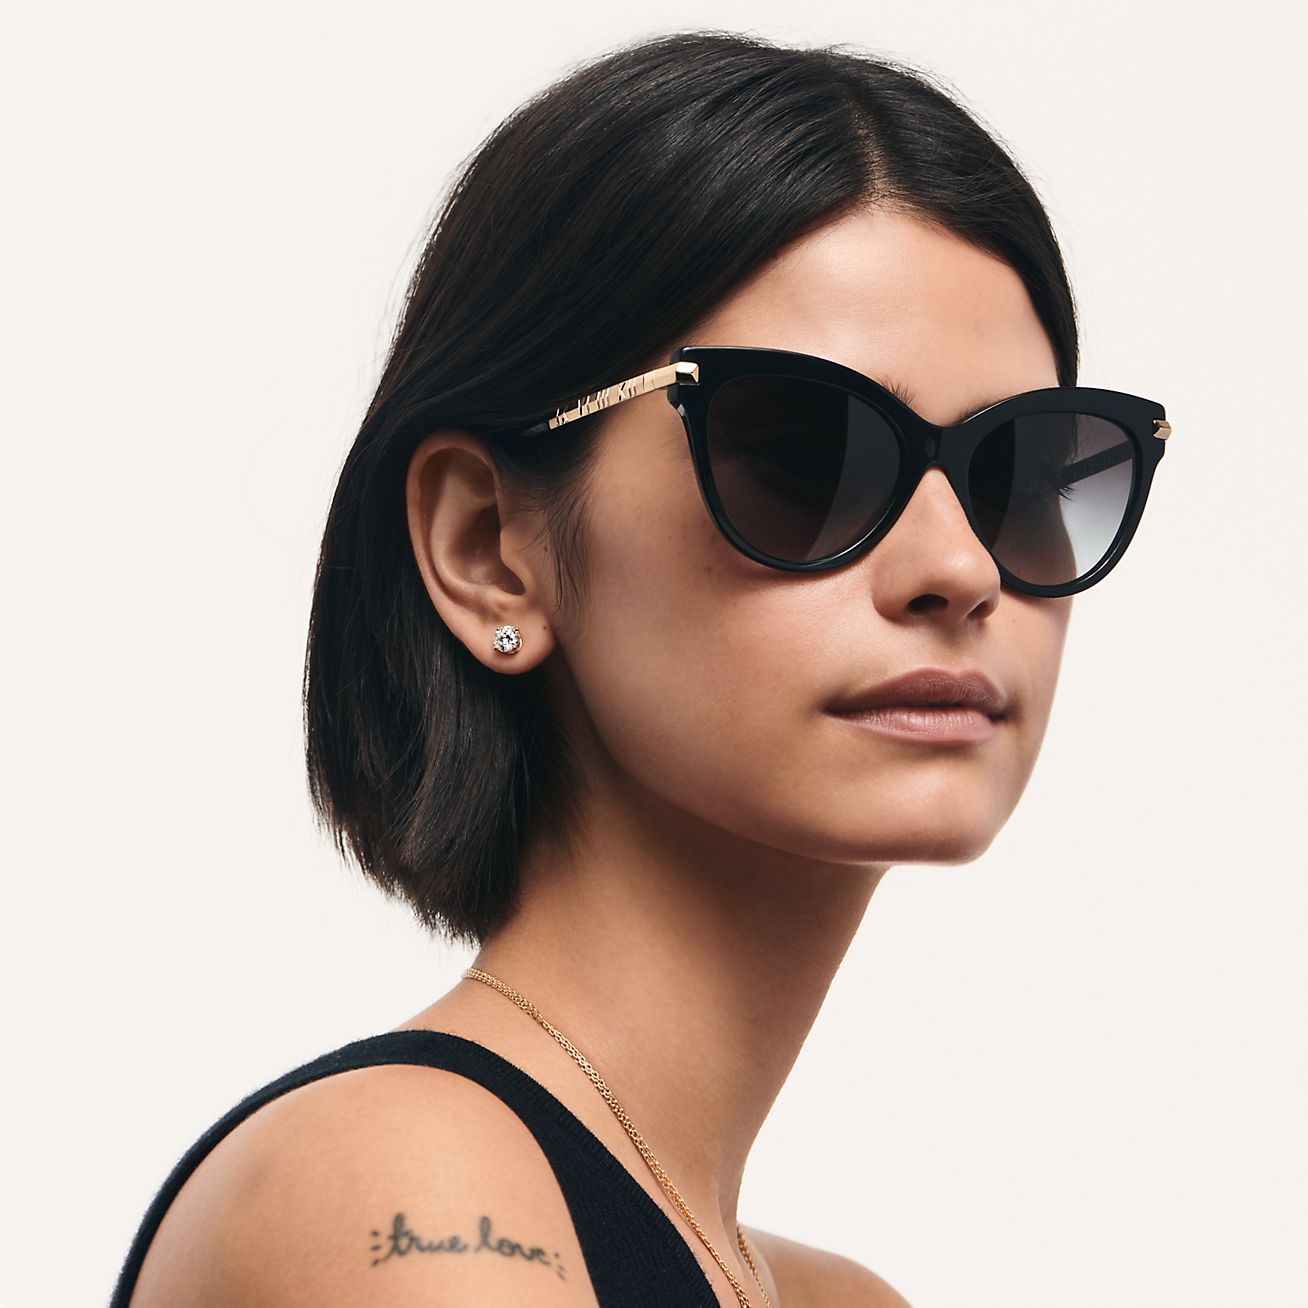 Atlas Cat Eye Sunglasses in Black Acetate with Pale Gold-Colored Metal Accents